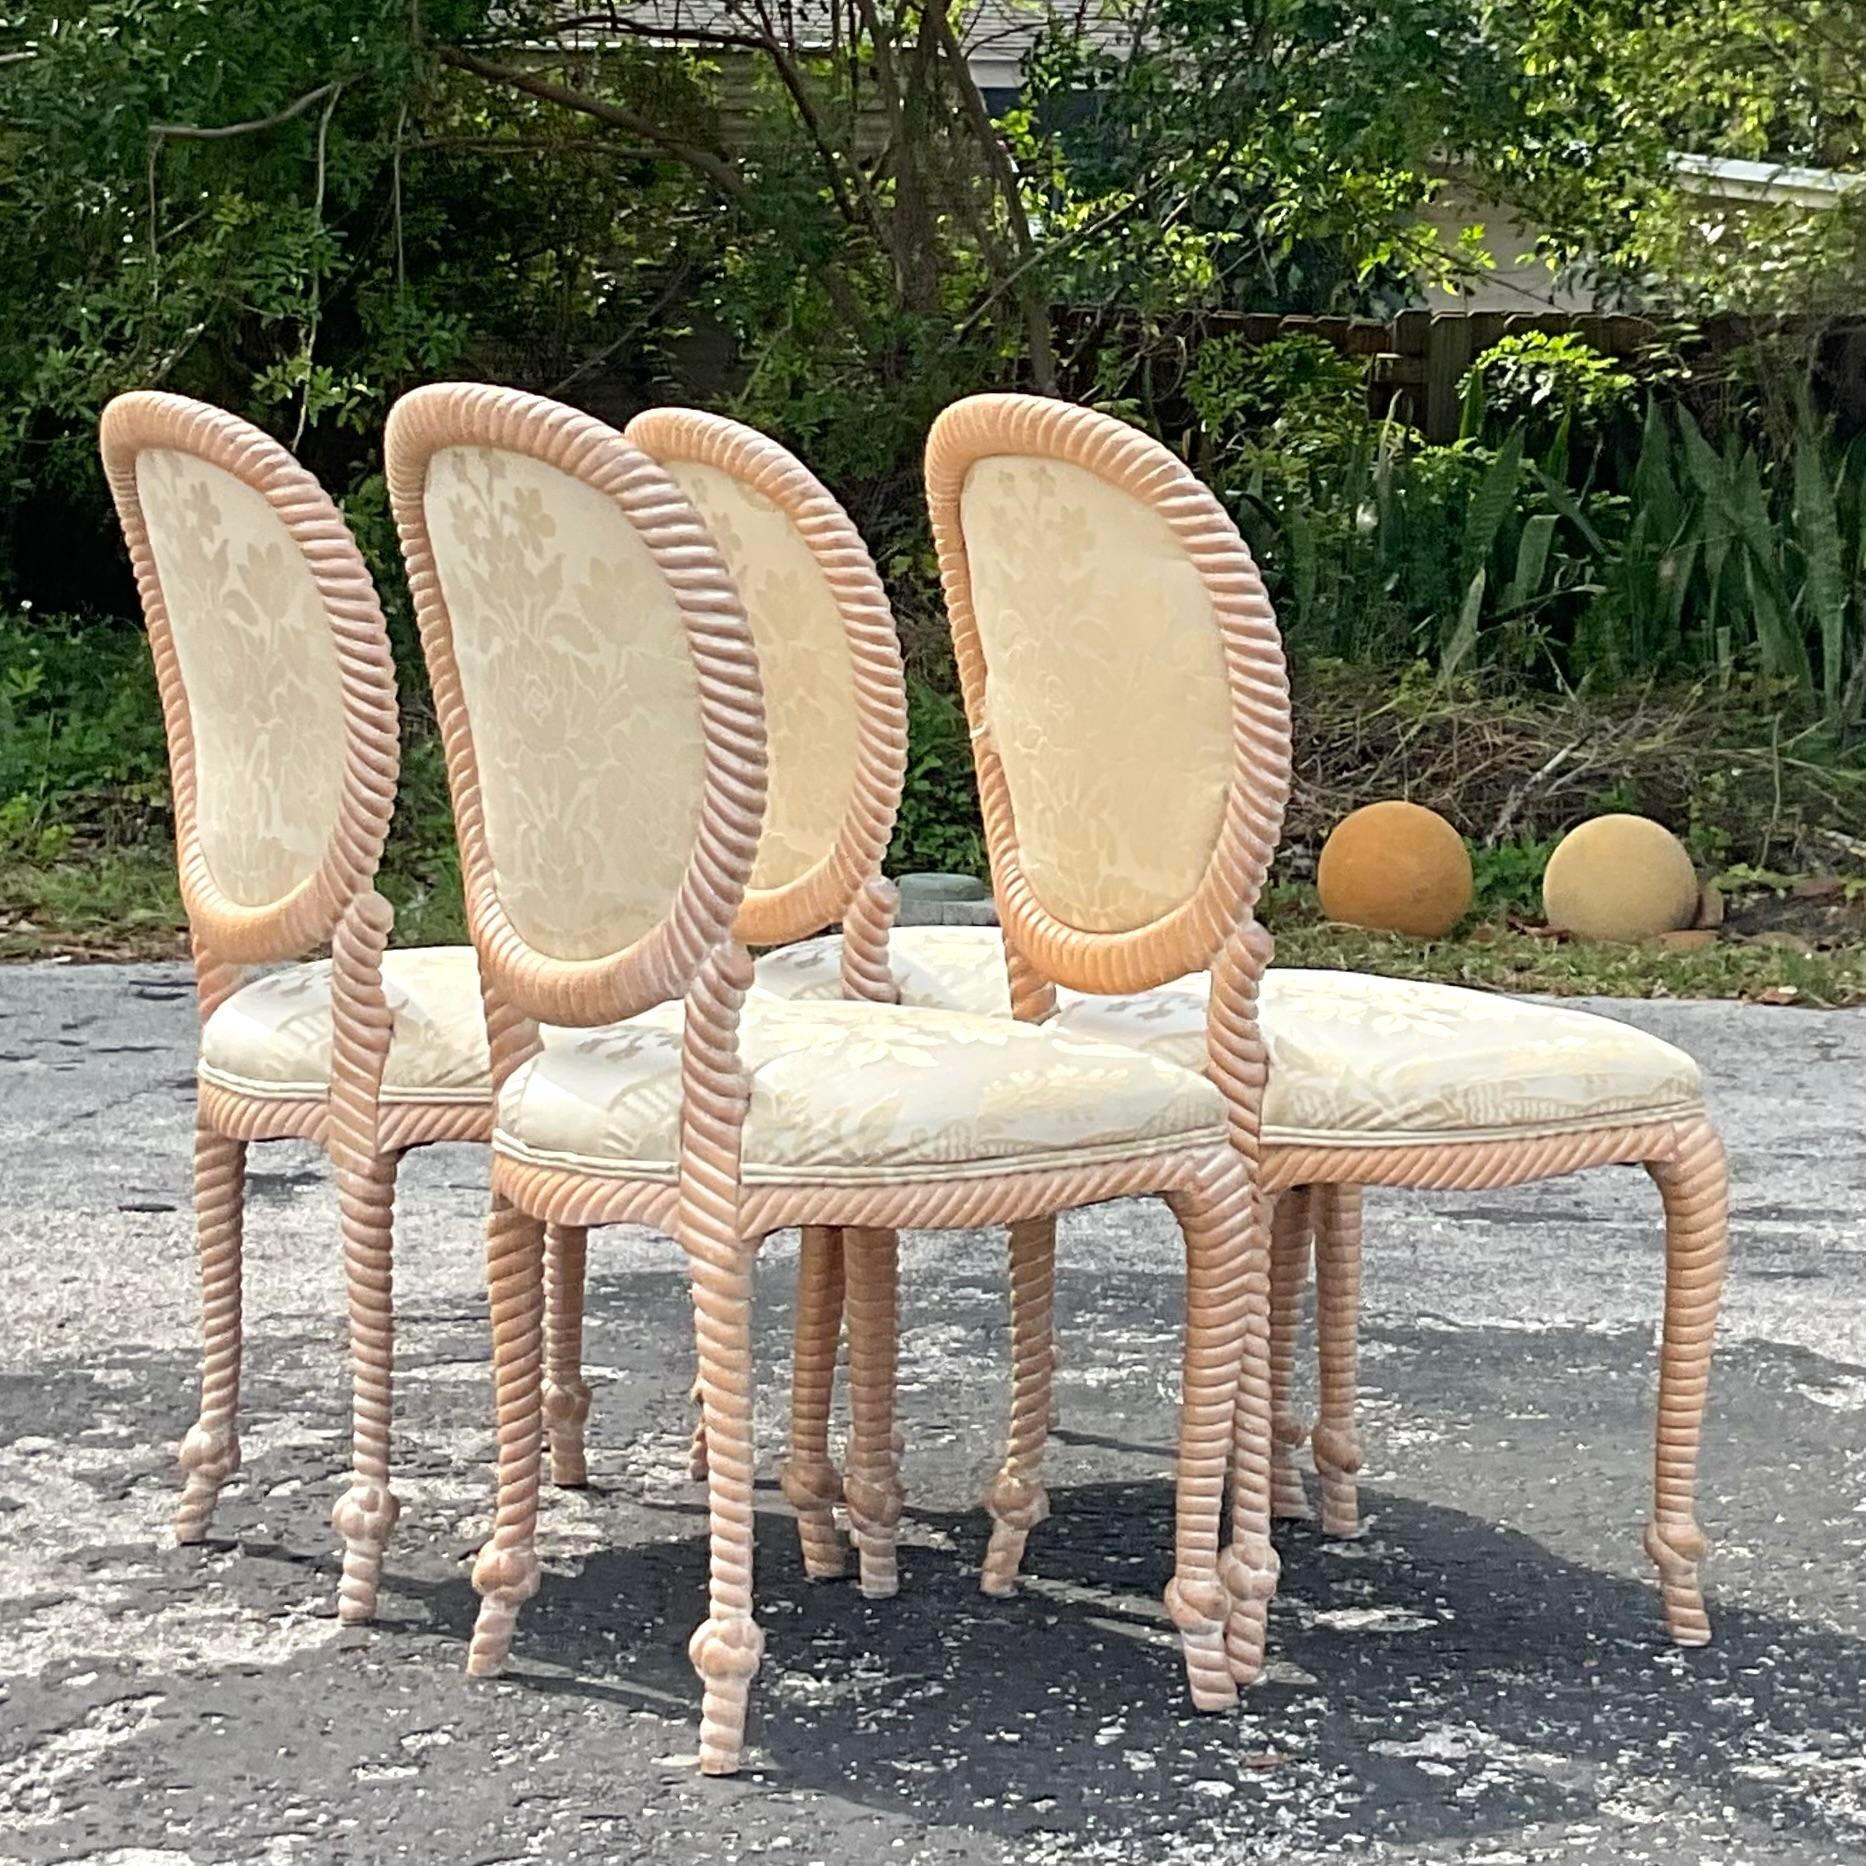 Bohemian Vintage Coastal Carved Rope Dining Chairs - Set of 4 For Sale